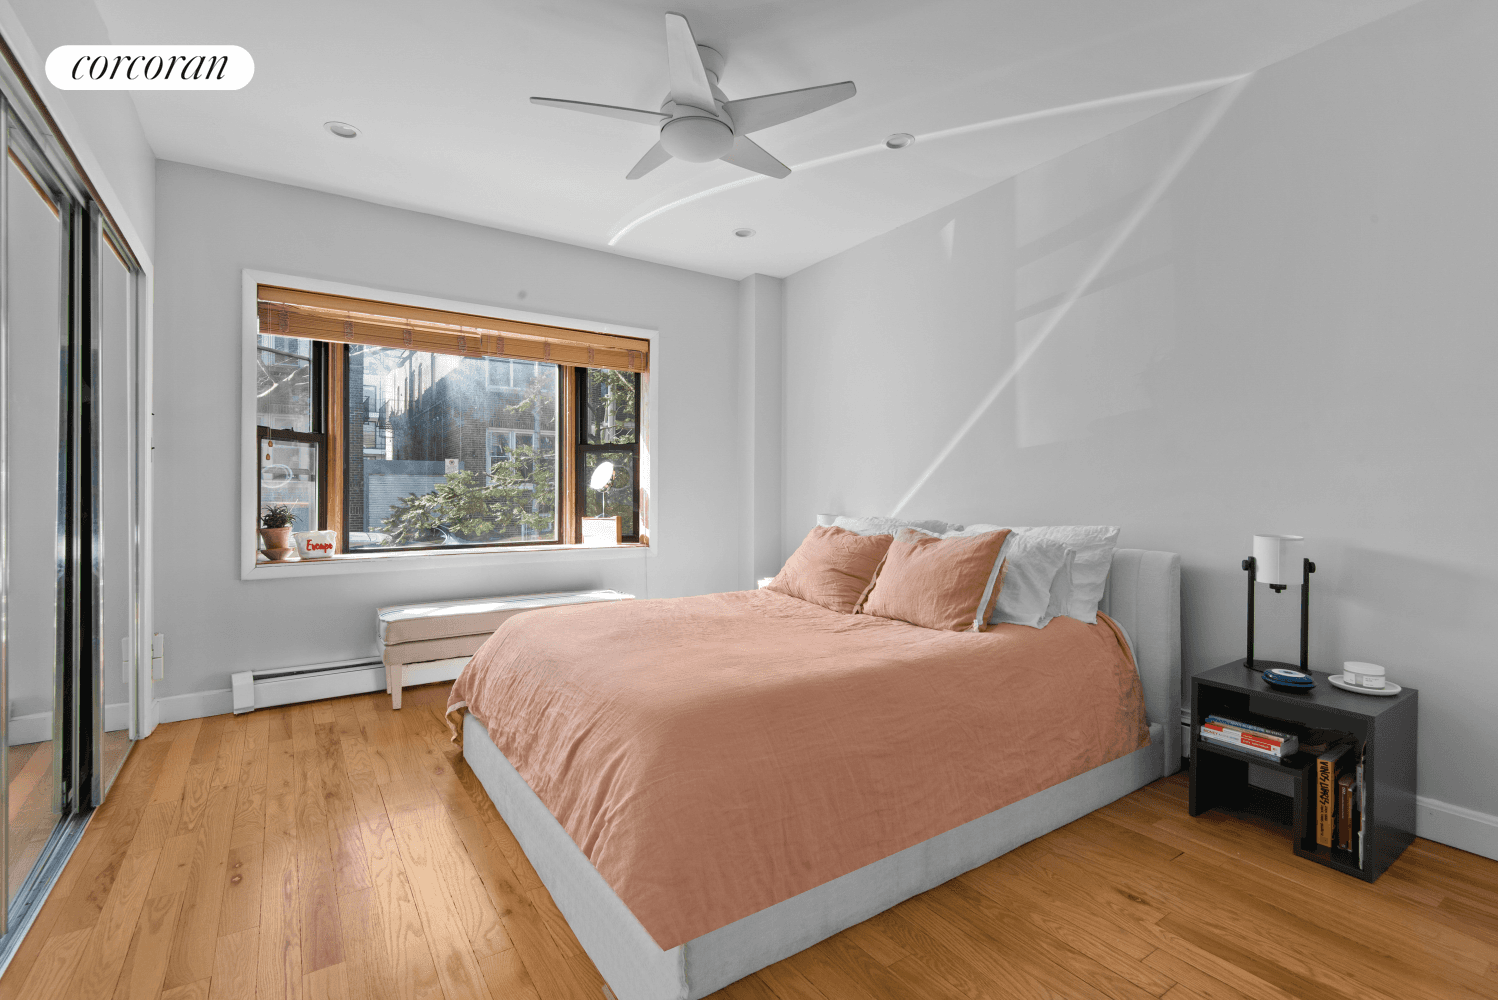 Magnificent two bedroom apartment perfectly located on a tree lined, residential street in Williamsburg with the Lorimer L train station just 2 blocks away.